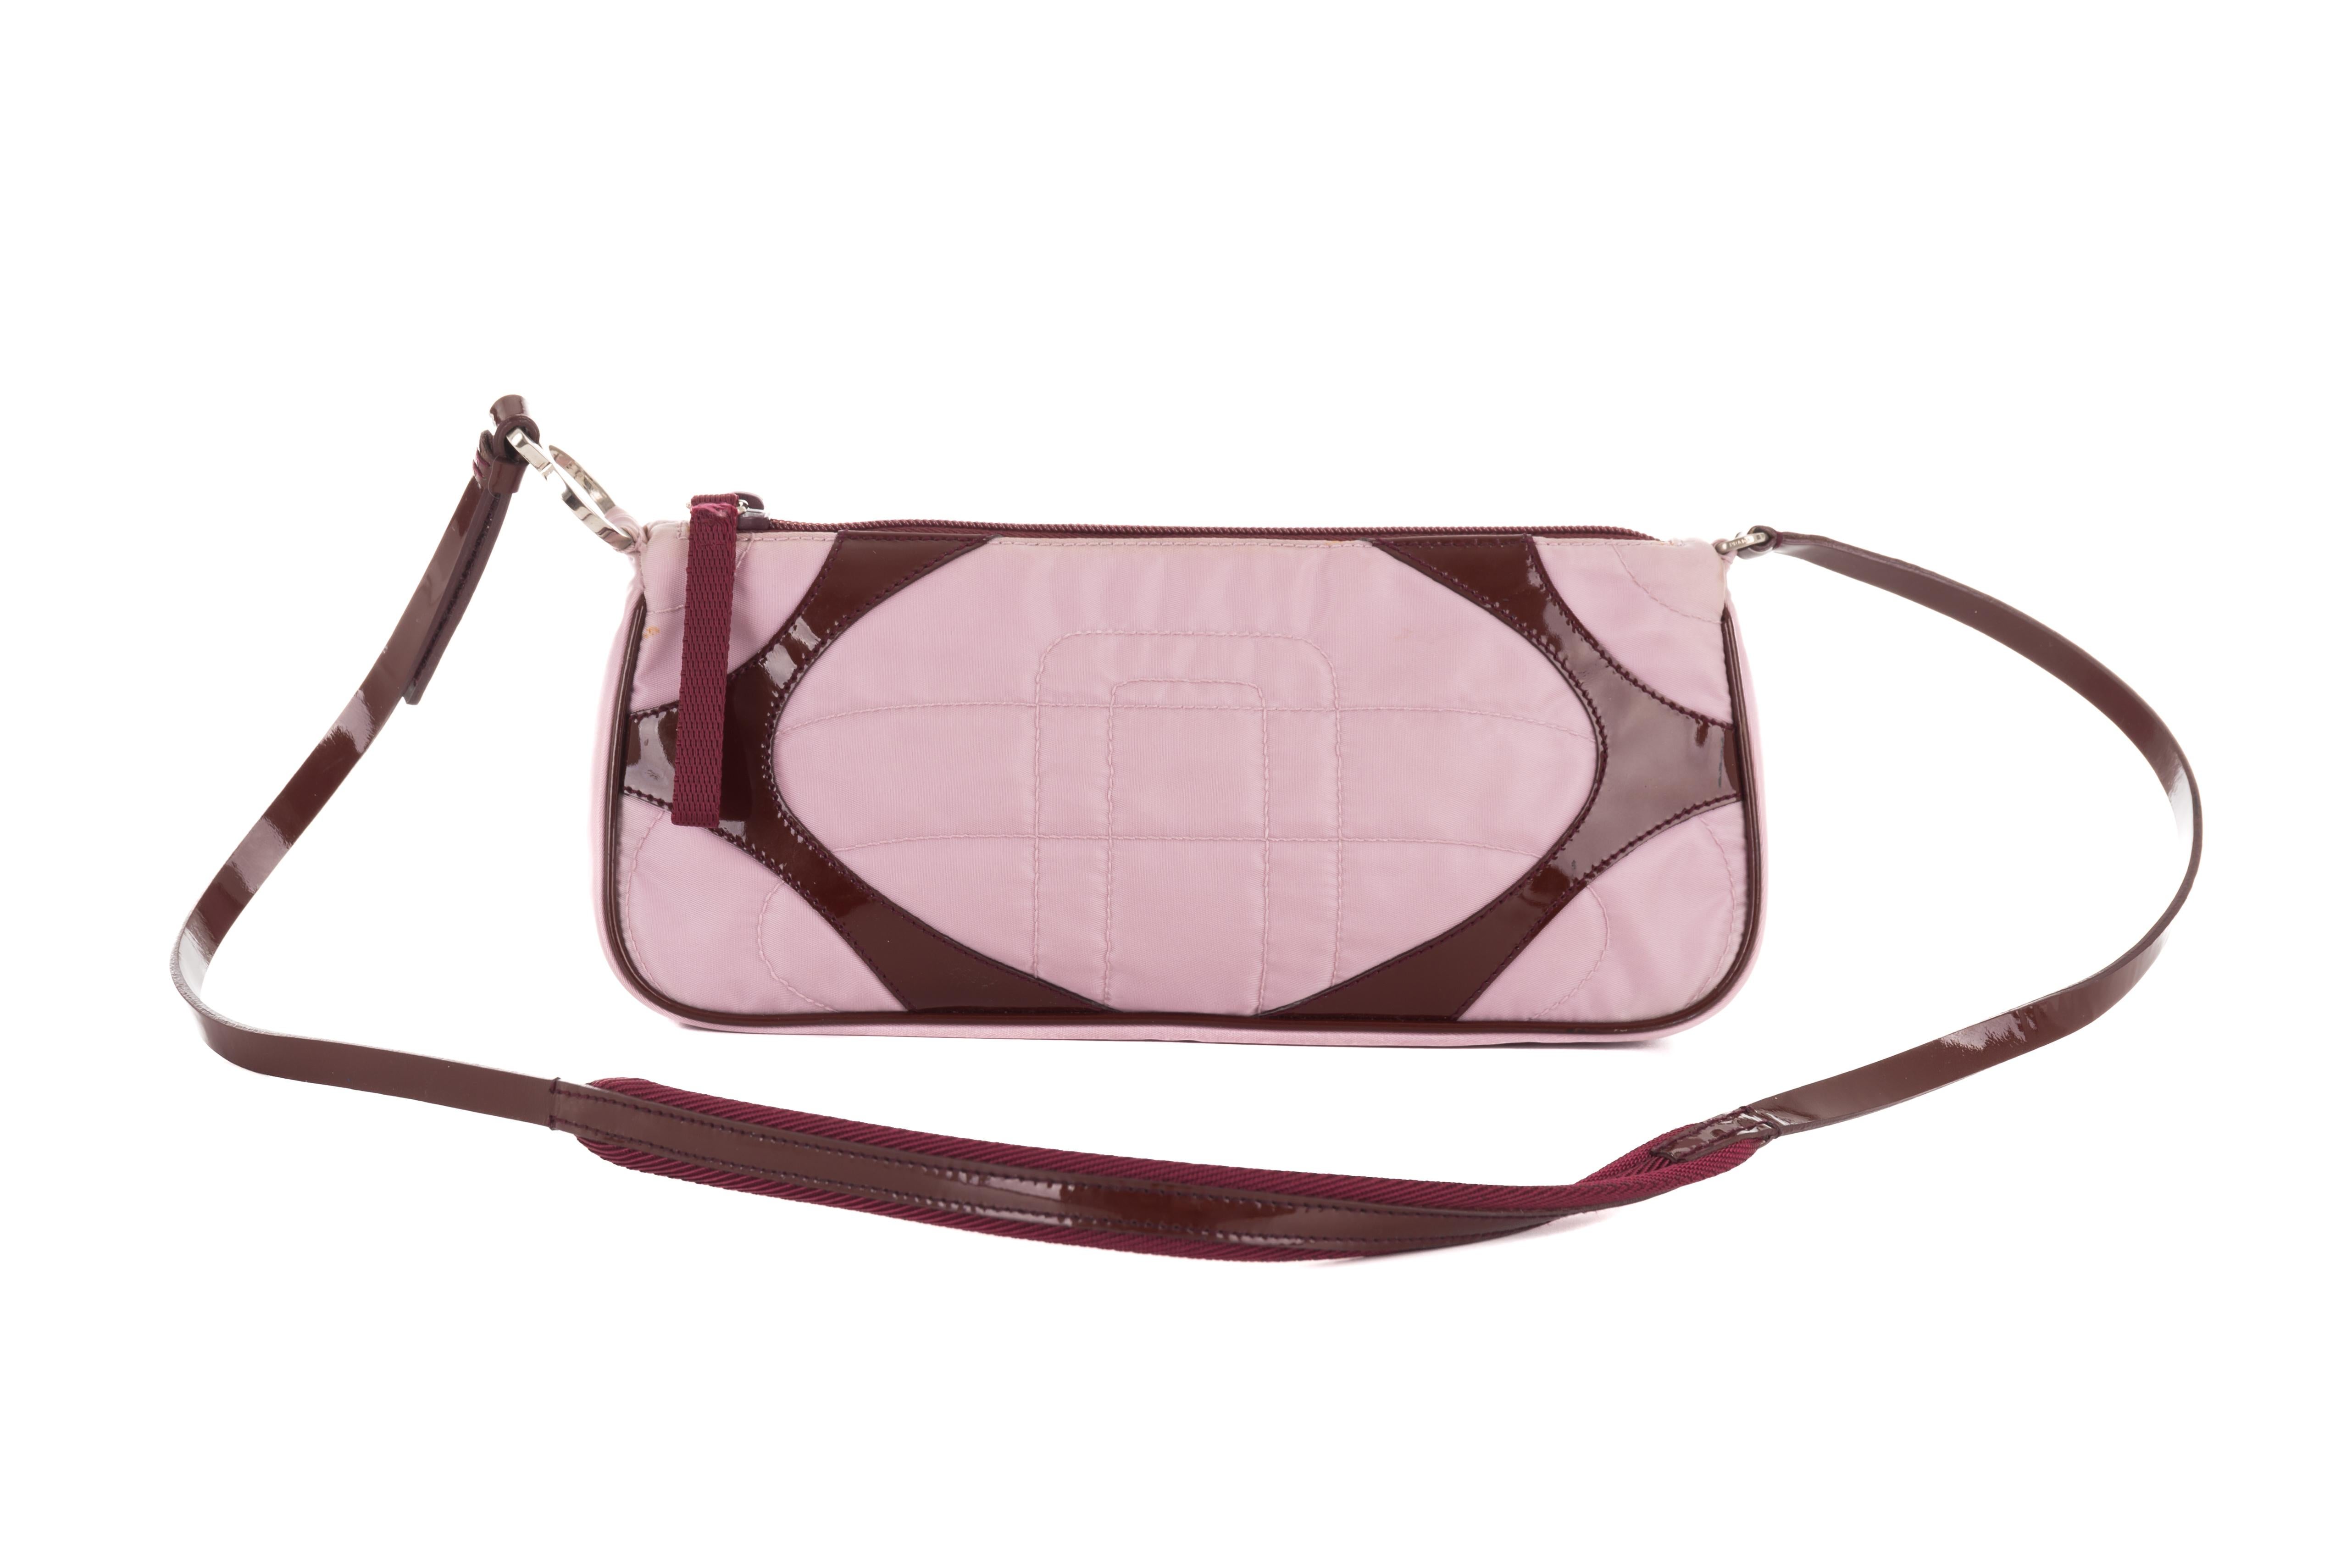 Prada S/S 2000 pink and burgundy nylon Sport mini bag In Good Condition For Sale In Rome, IT